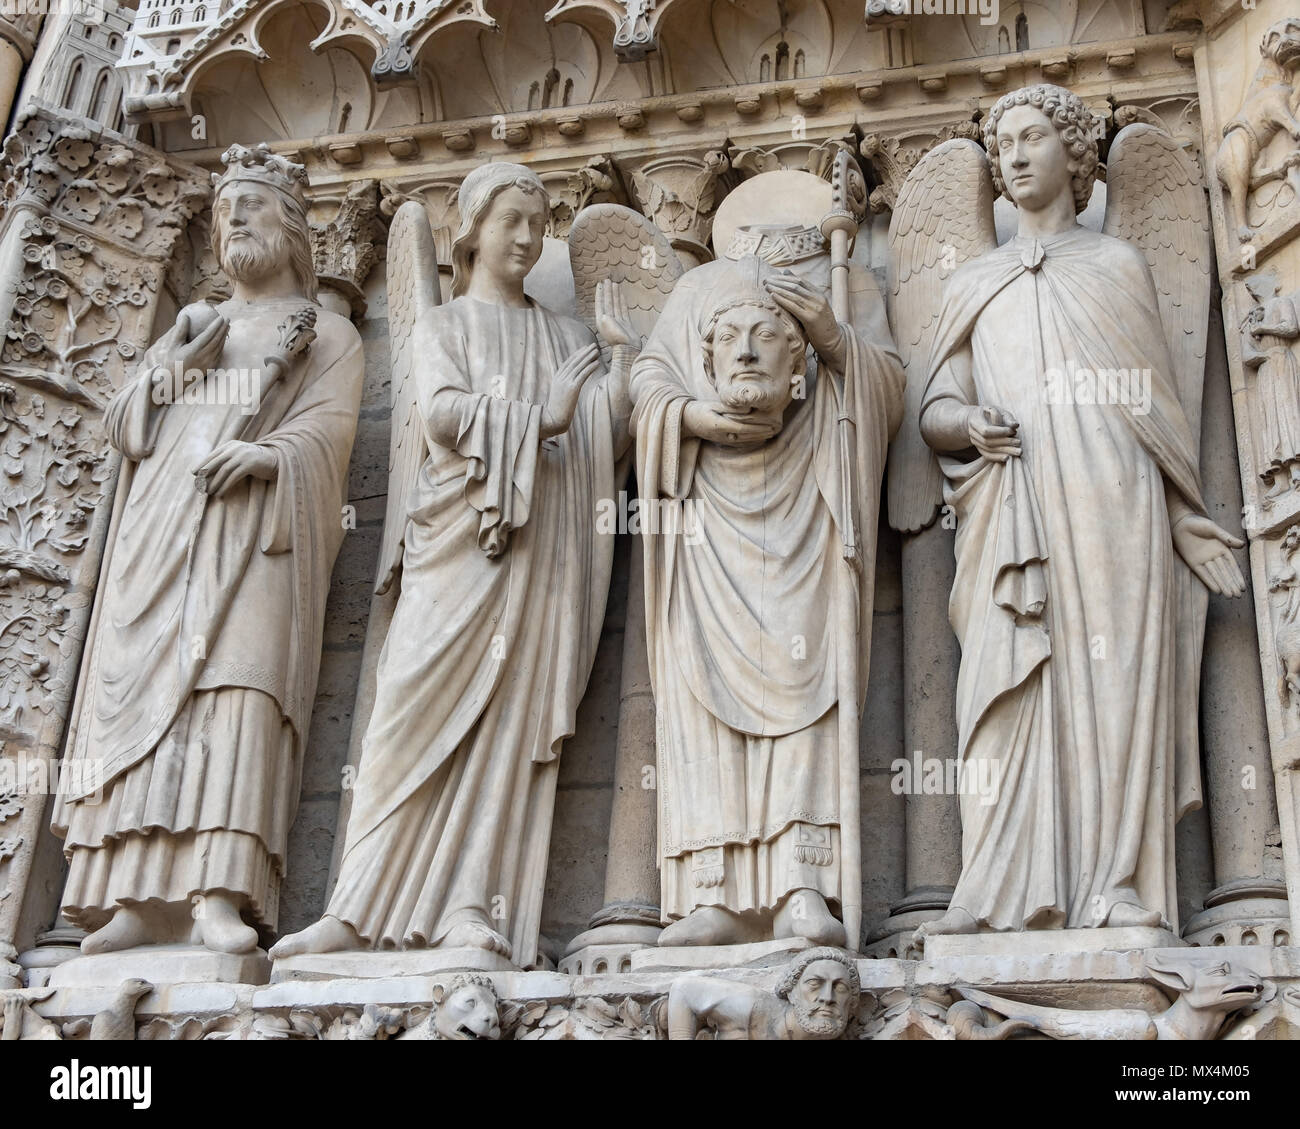 Sculpture from the facade of the Notre dame Cathedral in Paris France. Stock Photo